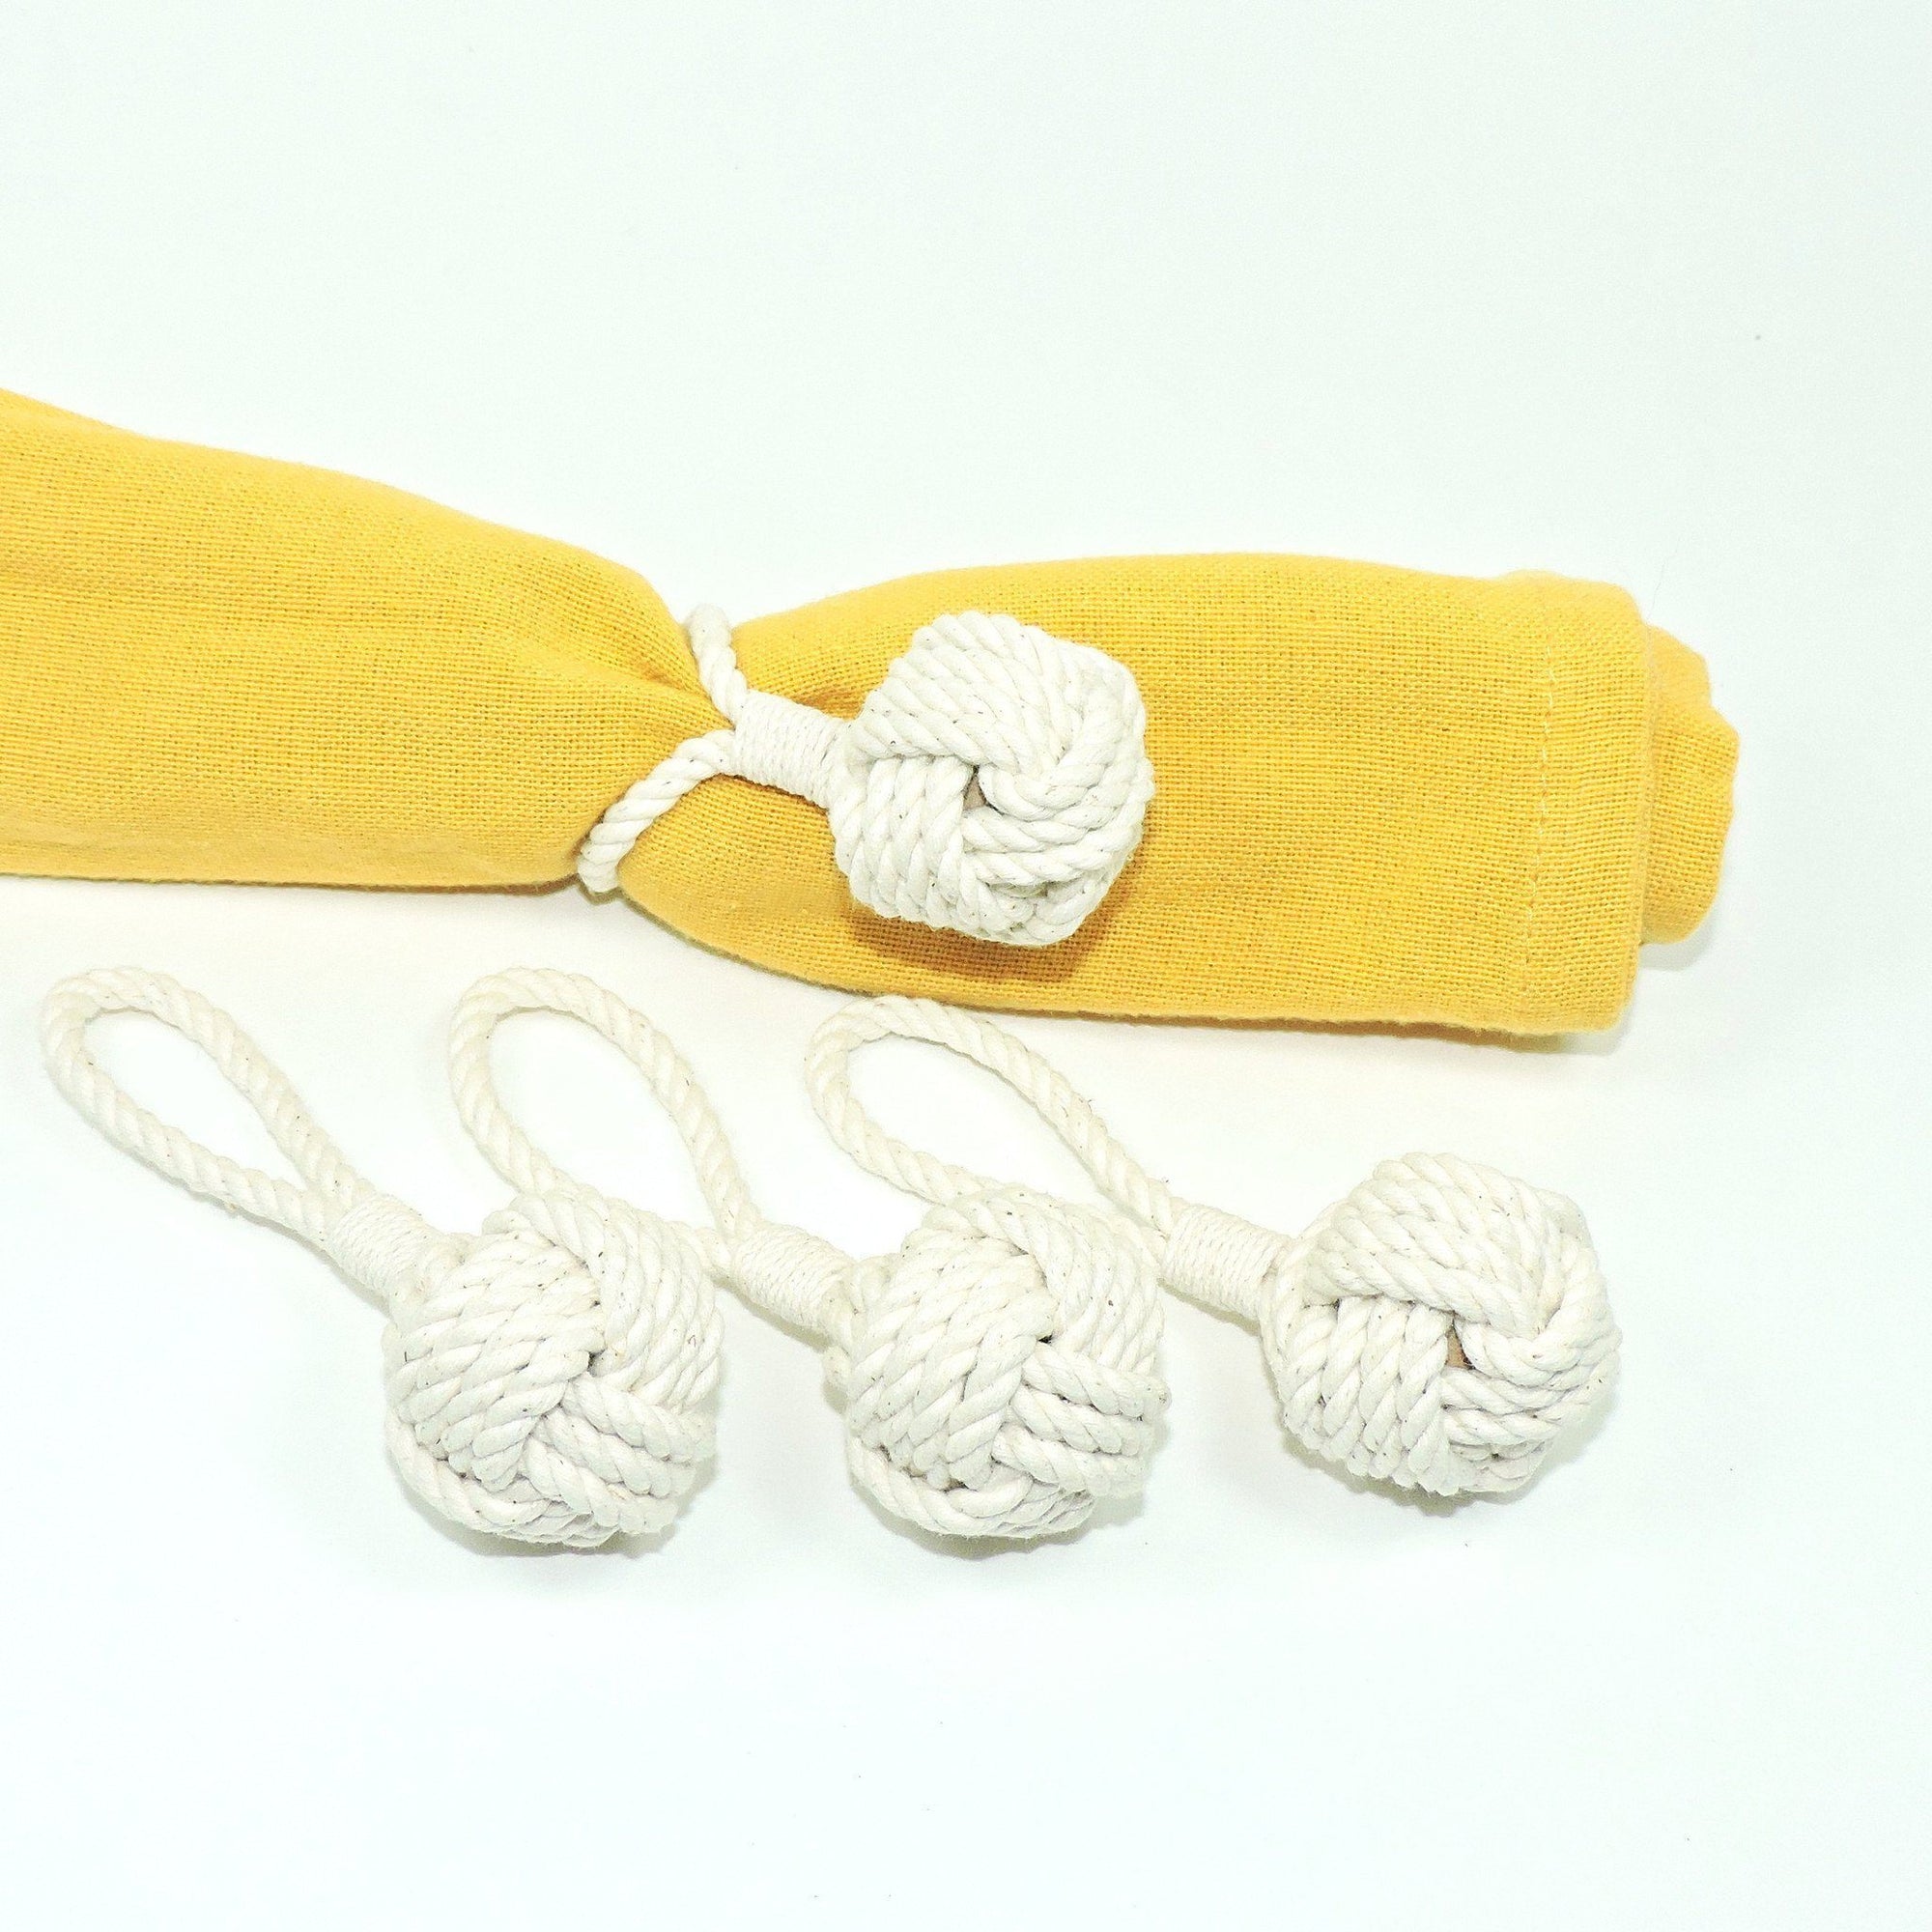 Nautical Knot Monkey Fist Knot Napkin Rings, Set of Four handmade at Mystic Knotwork